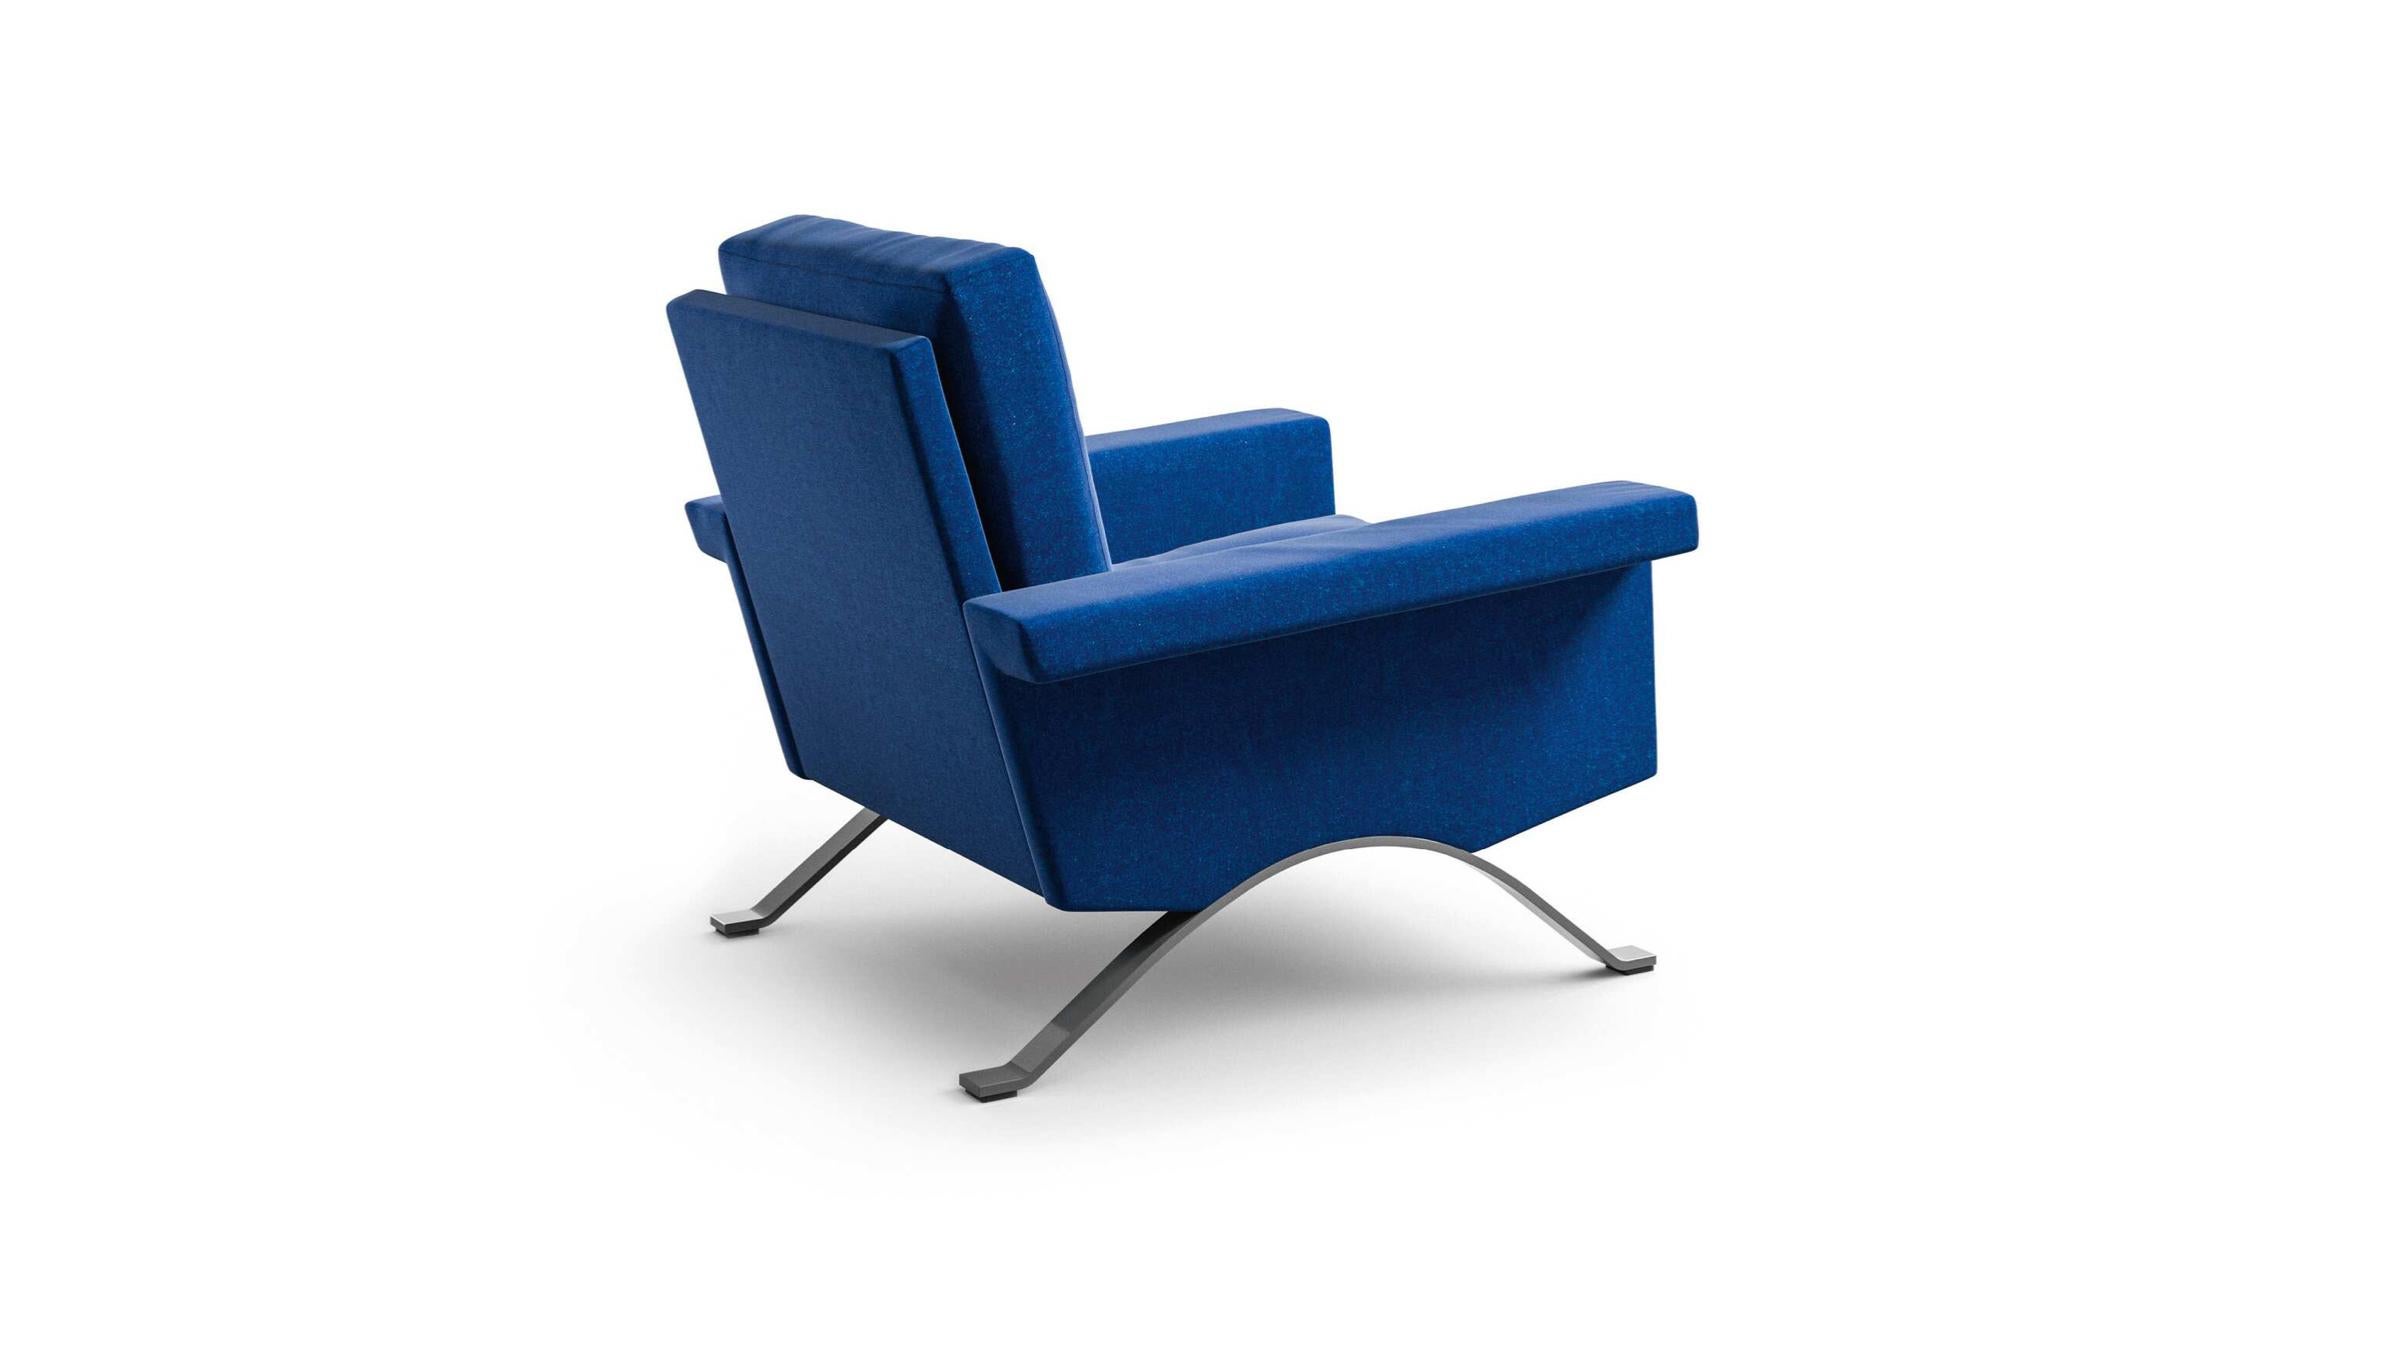 Prices vary dependent on the material.

Designed by Ico Parisi in 1960 for Cassina, at that time “Figli di Amedeo Cassina”, the 875 is a welcoming and elegant armchair. The author’s typical experimentation has led to a project that is both classic